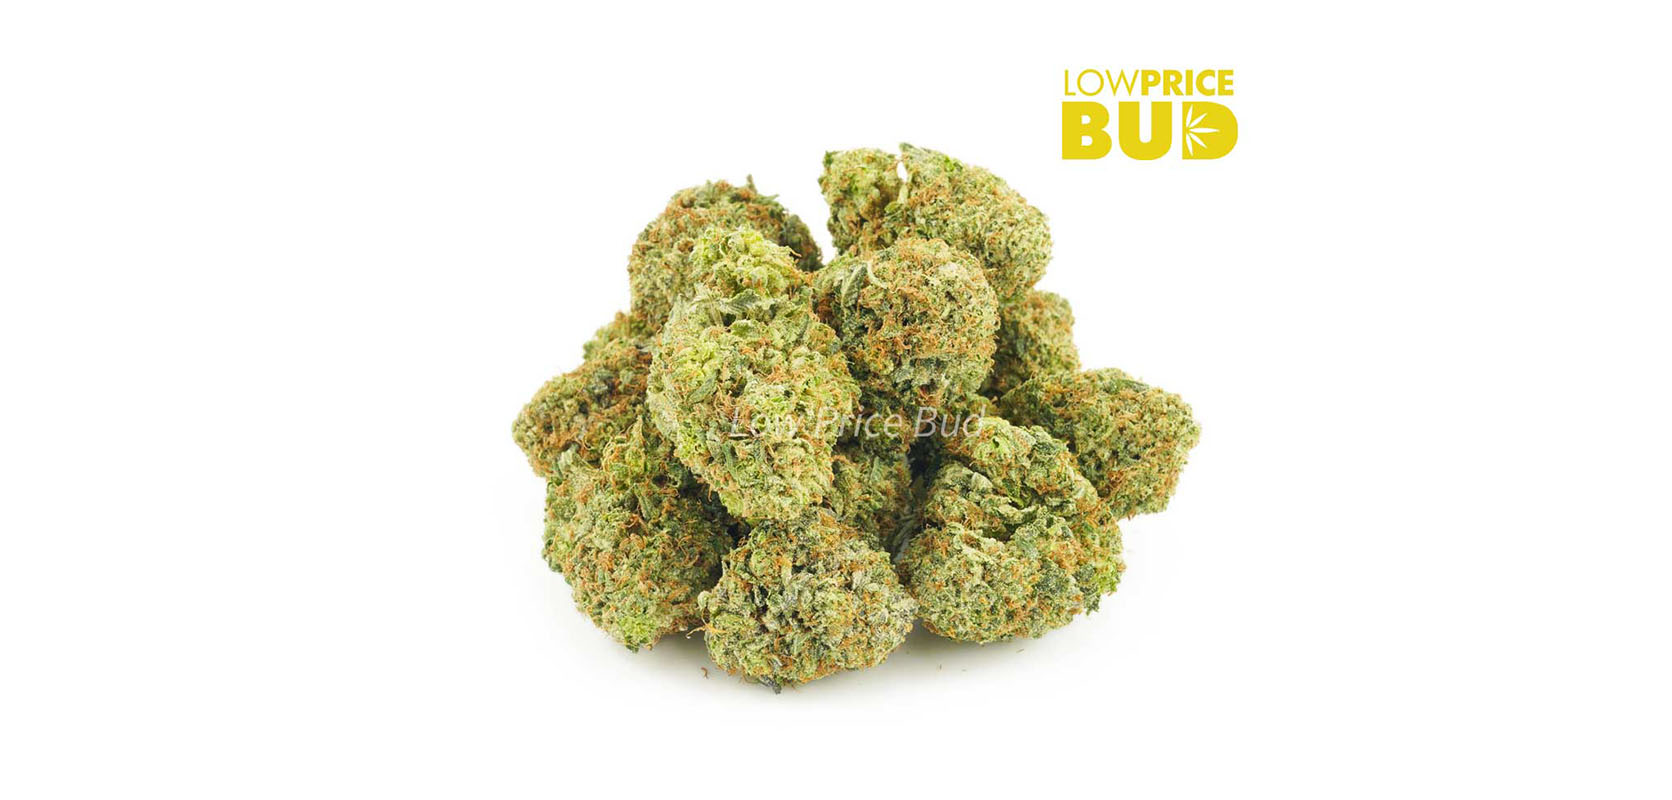 Blue dream bugs from low price bud. buy weed online from mail order marijuana dispensary in BC.